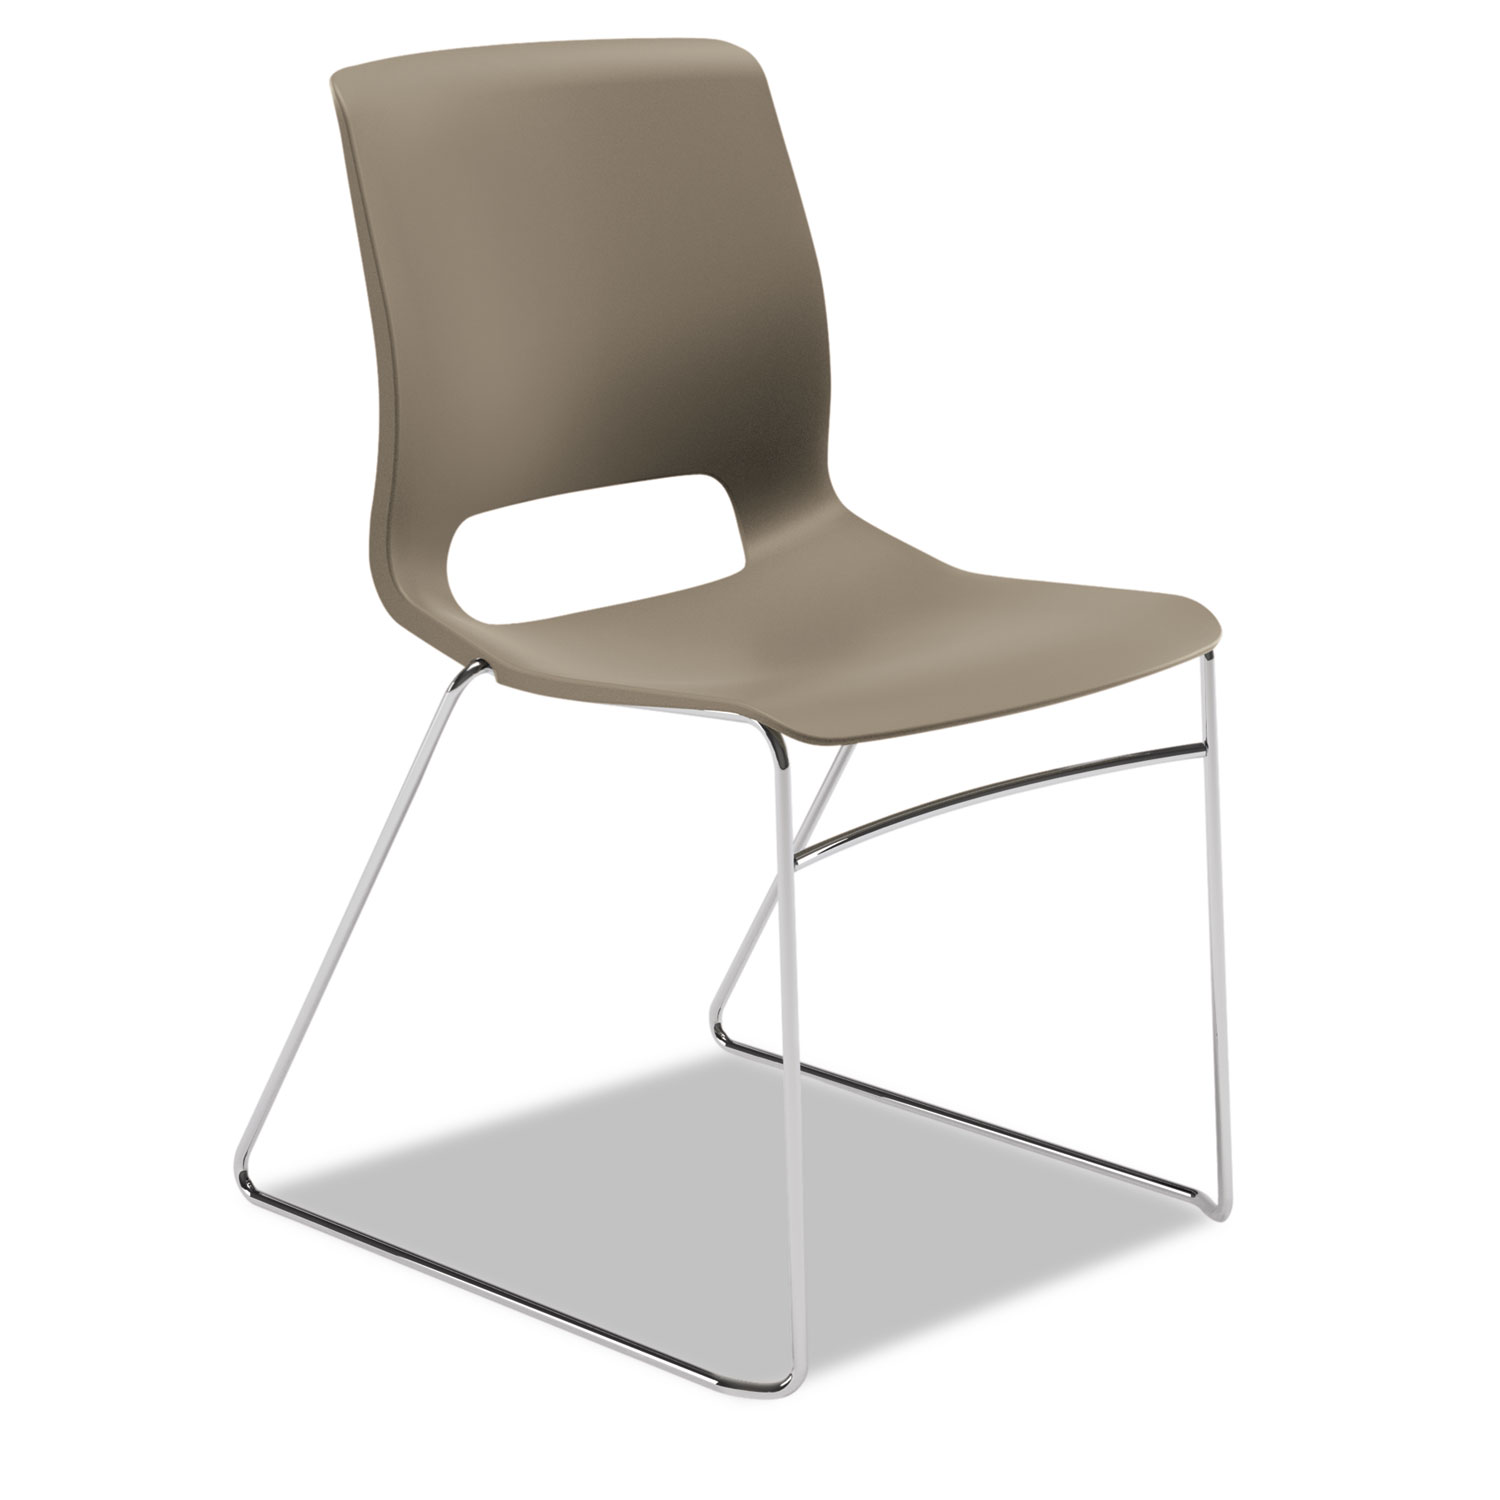 Motivate Seating High-Density Stacking Chair, Shadow/Chrome, 4/Carton